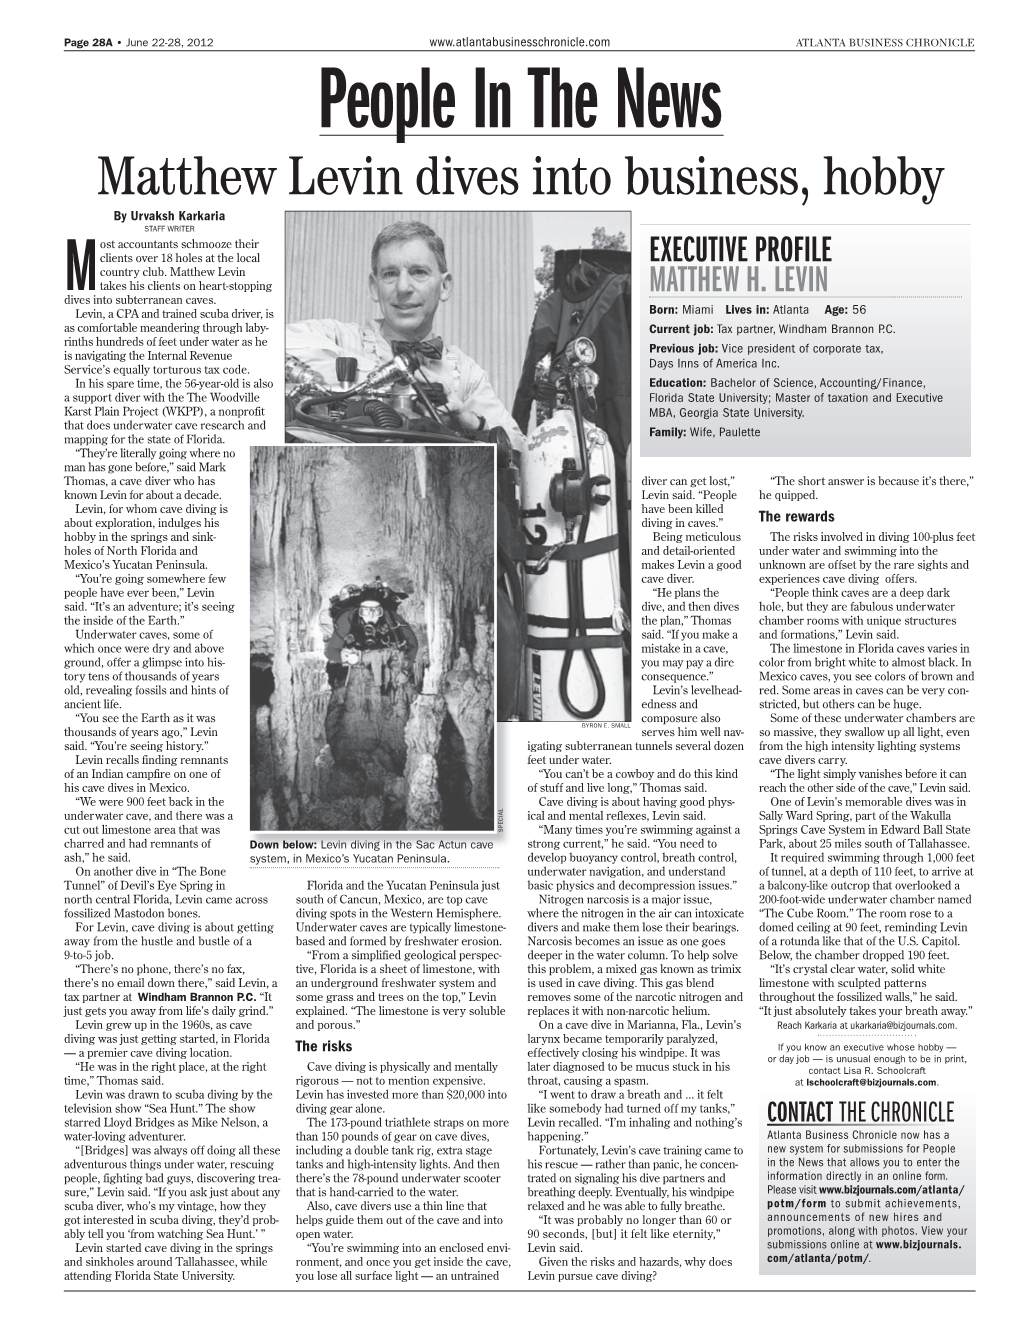 Matthew Levin Dives Into Business, Hobby